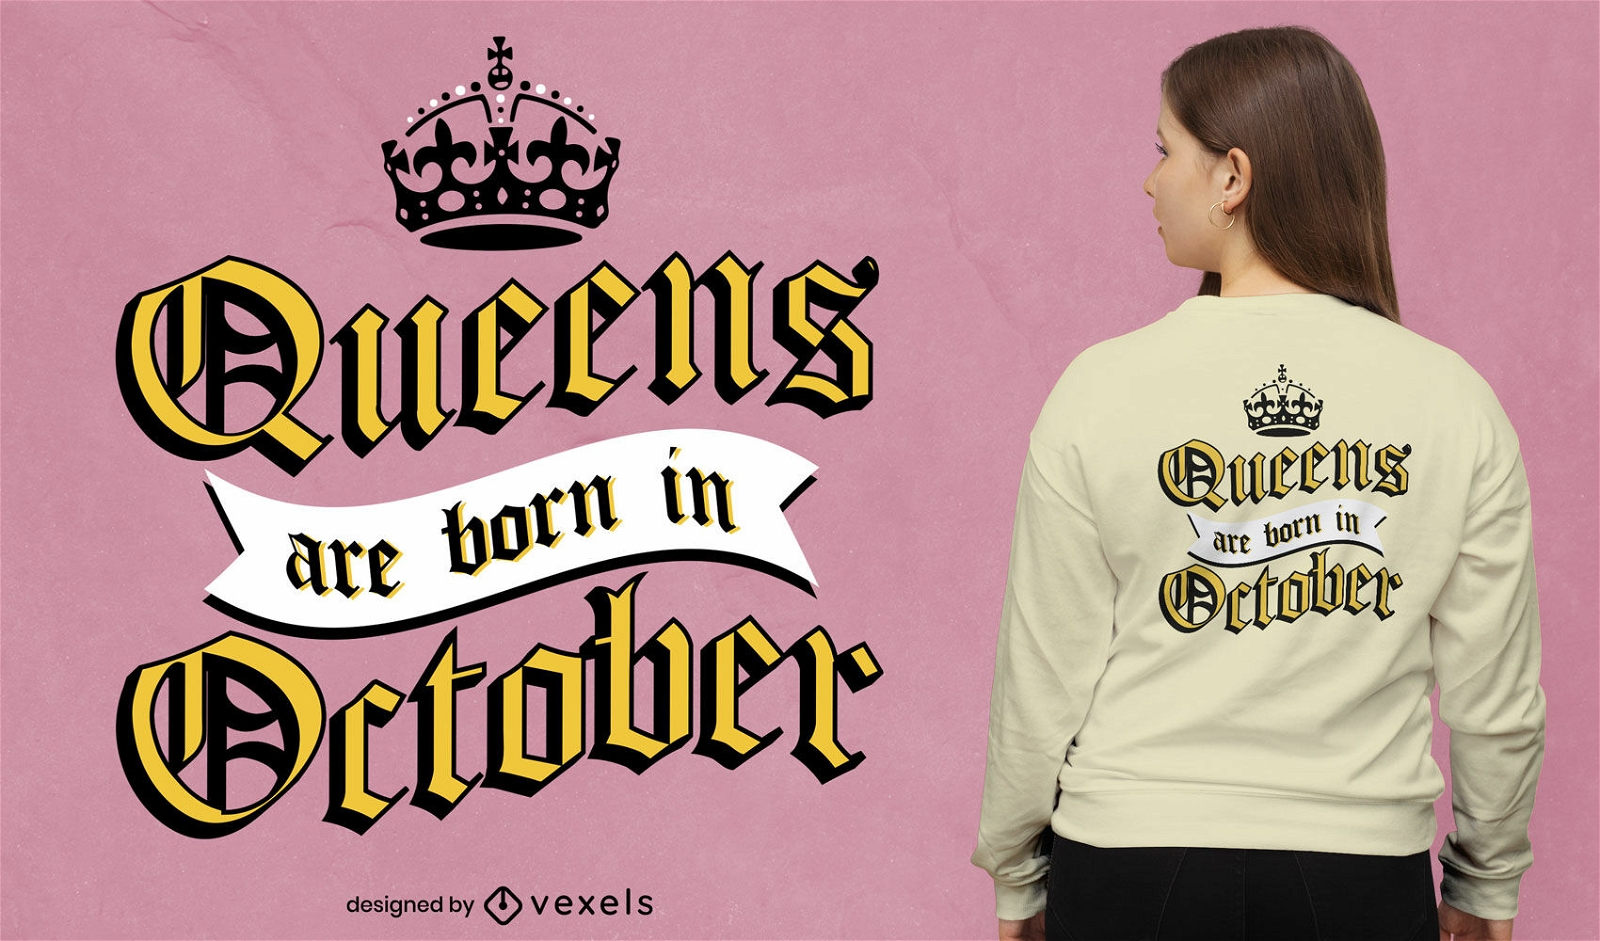 Awesome queens t-shirt design